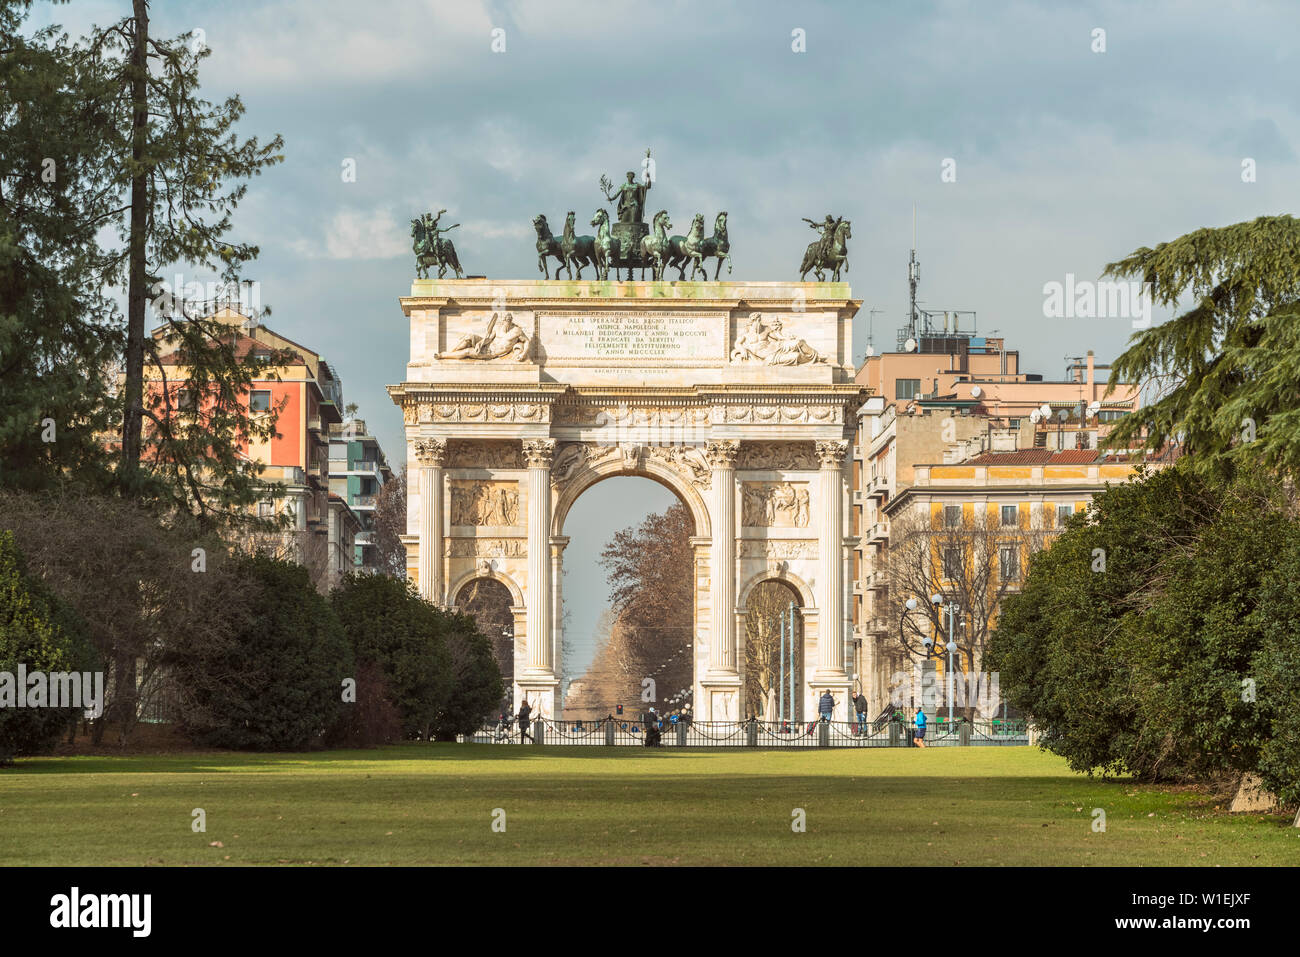 Triumphal arch with bas-reliefs and statues, built by Luigi Cagnola at the request of Napoleon, Milan, Lombardy, Italy, Europe Stock Photo